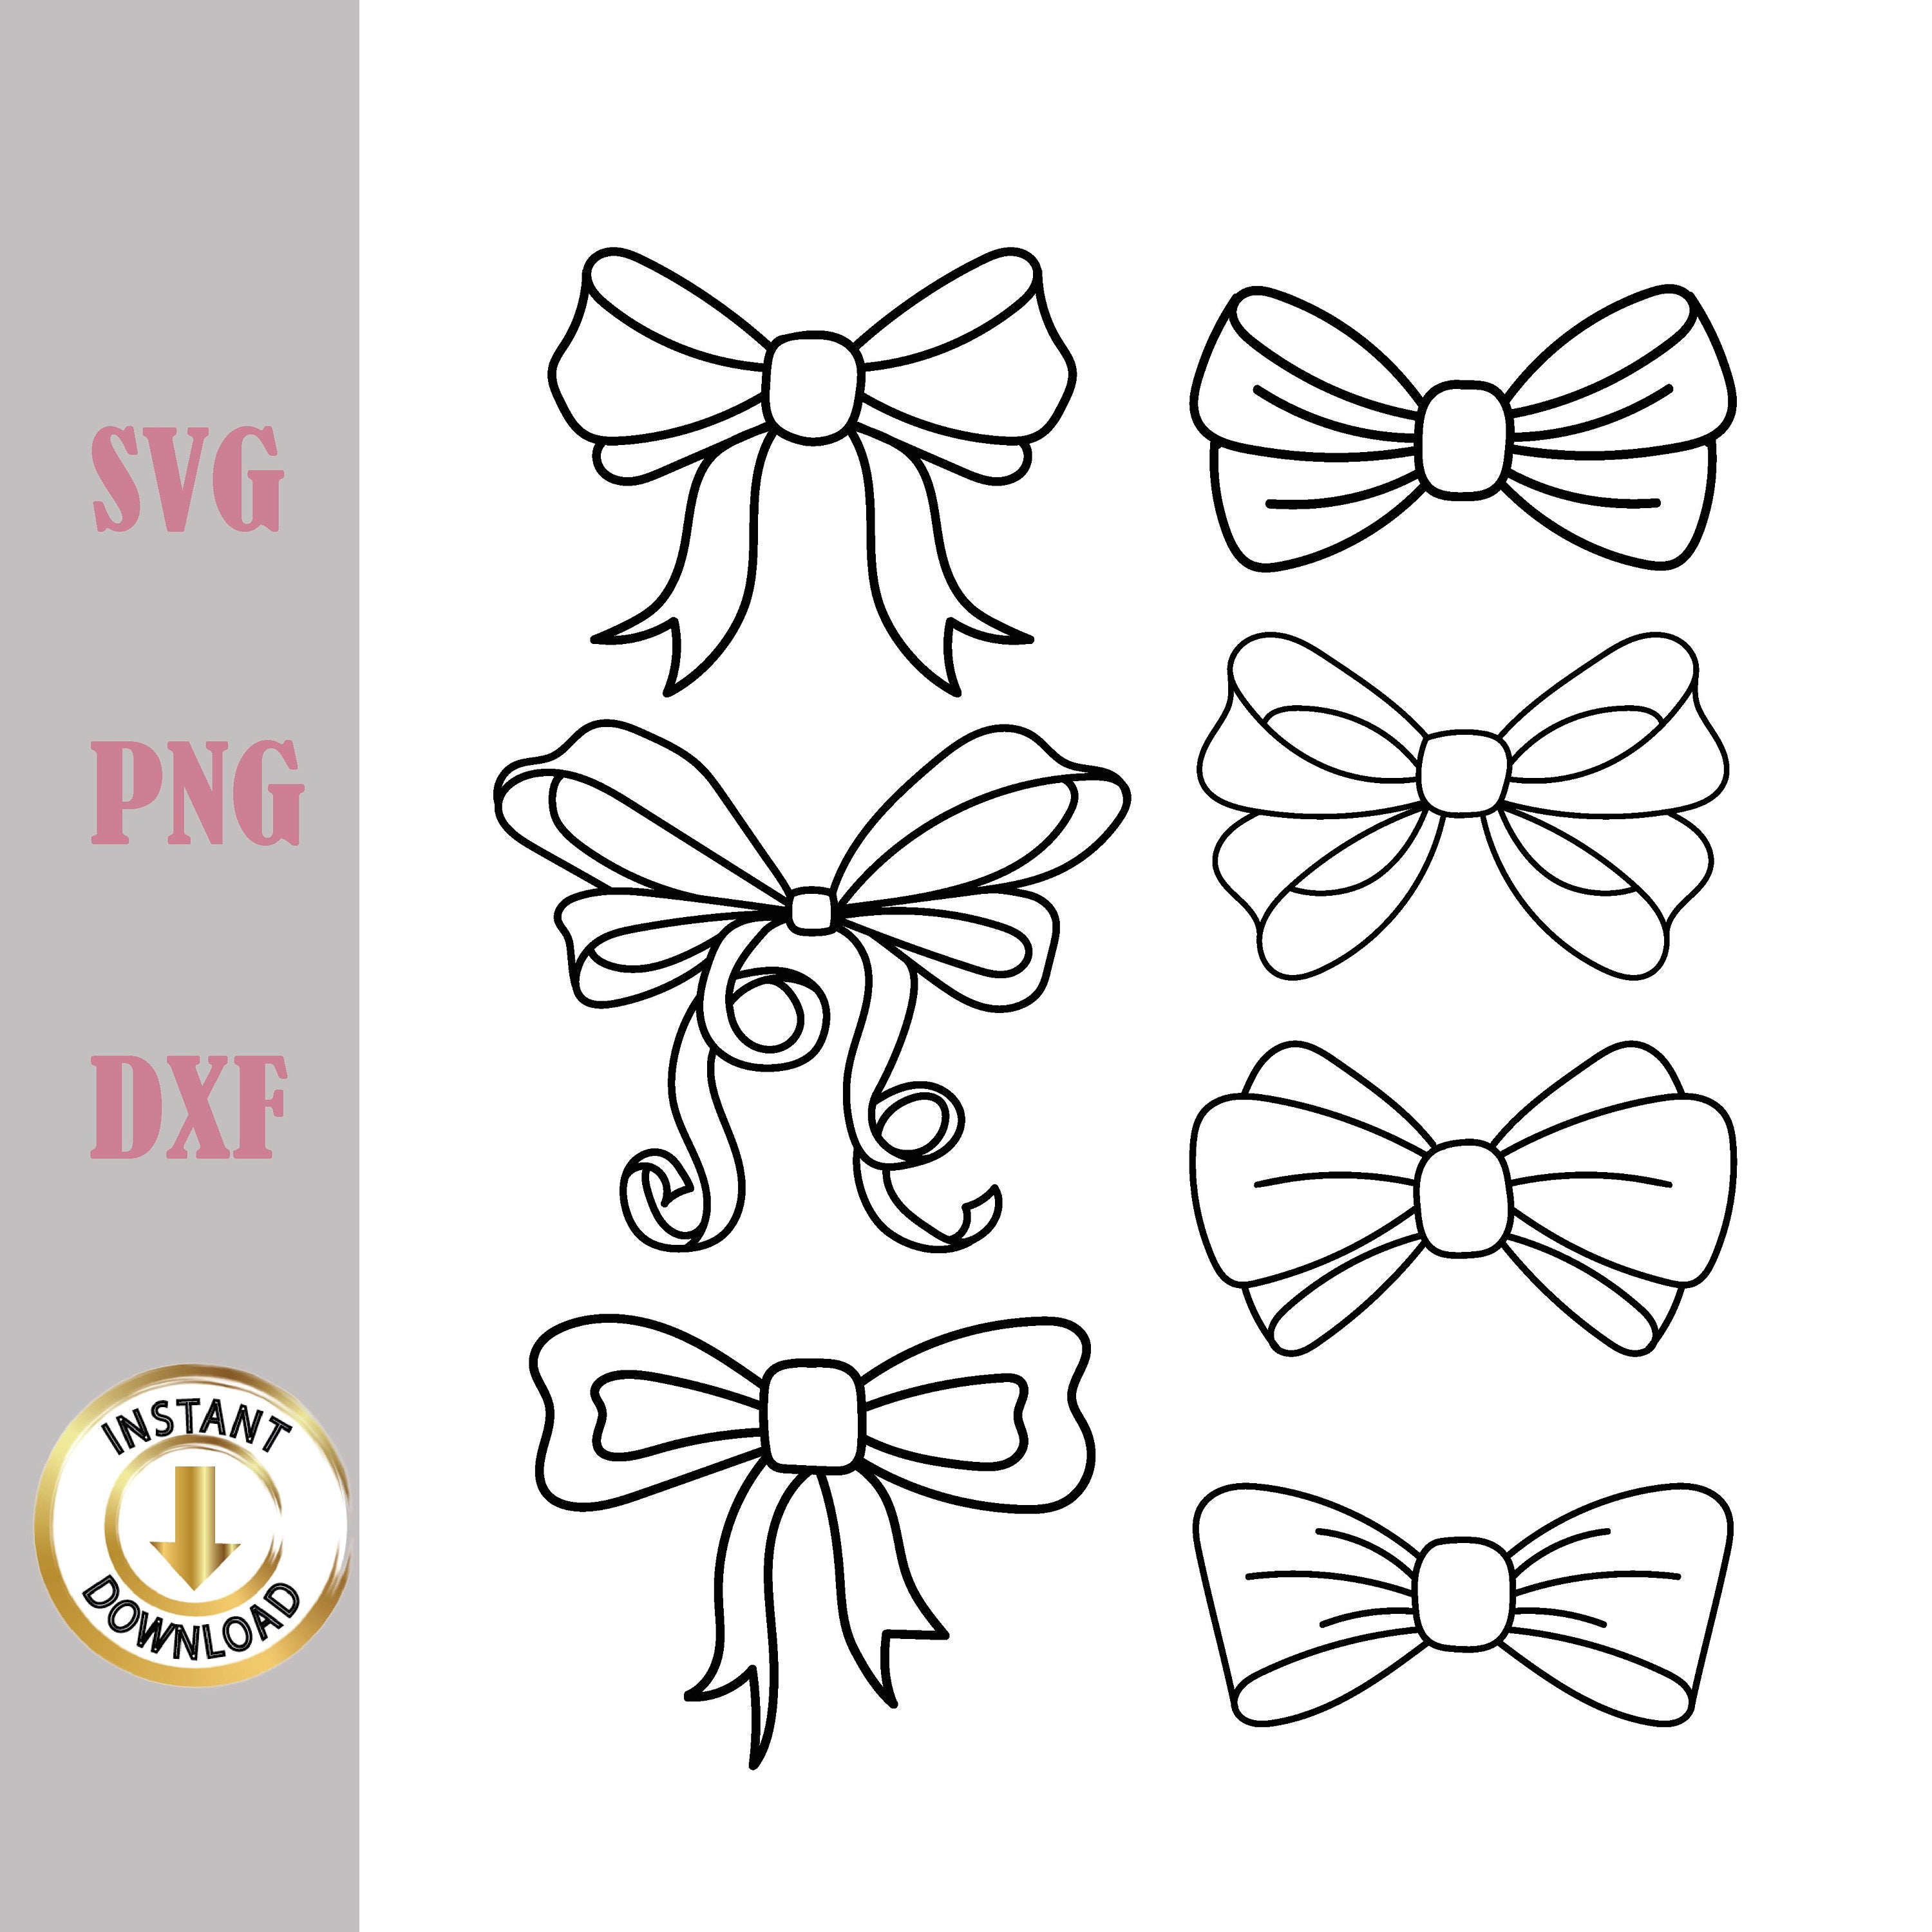 Line Cute Ribbon Bow Decoration Design Vector Illustration Royalty Free  SVG, Cliparts, Vectors, and Stock Illustration. Image 89916087.